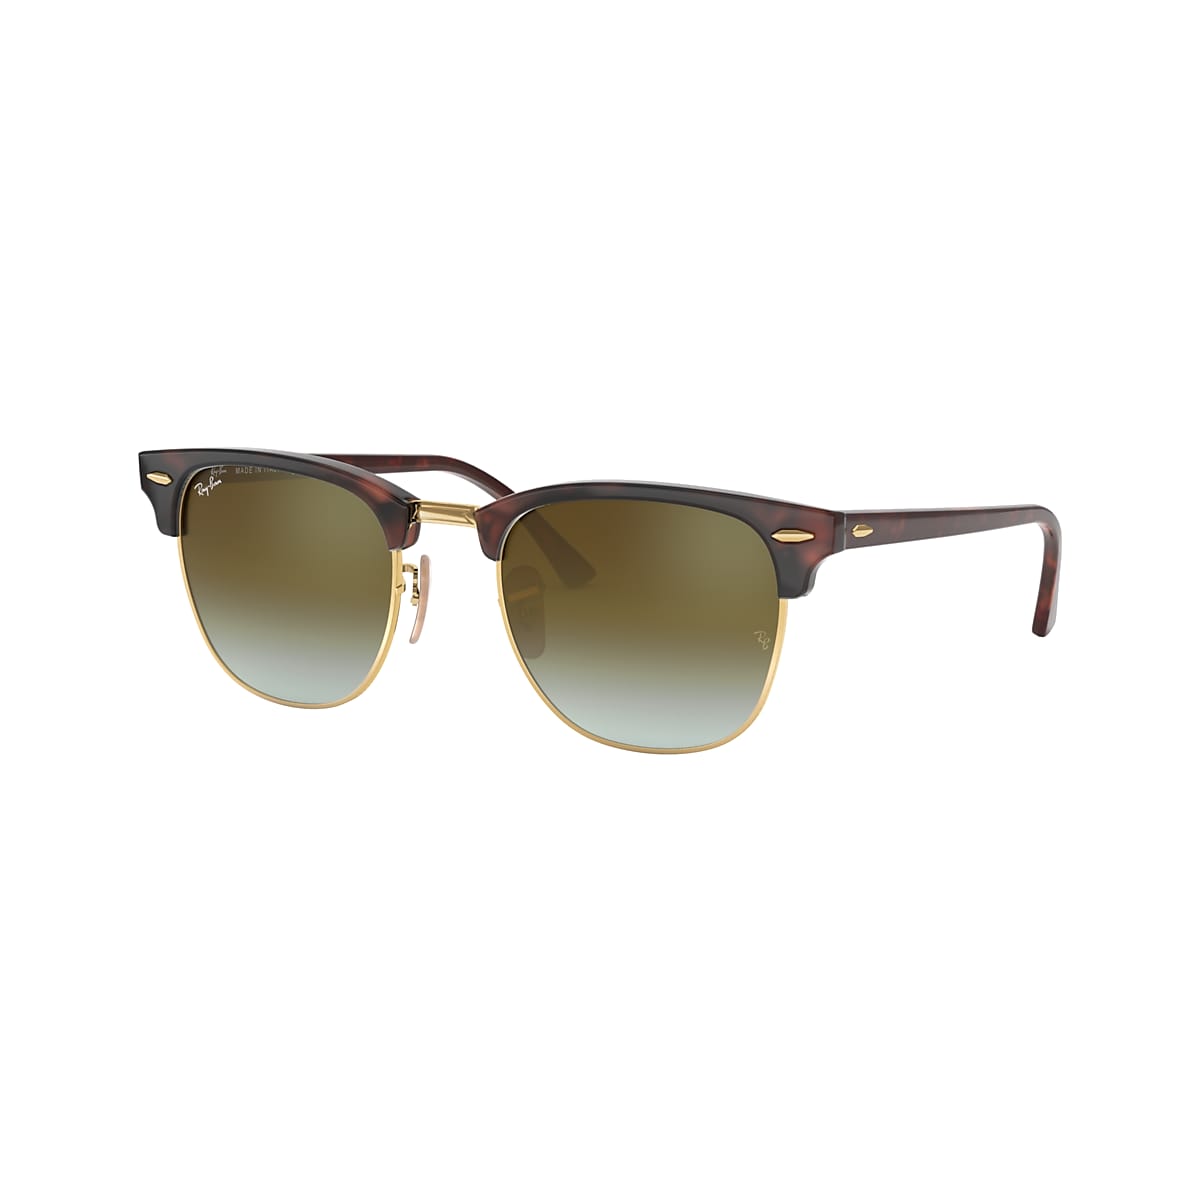 Ray-Ban 0RB3016 Sunglasses in Tortoise | Target Optical